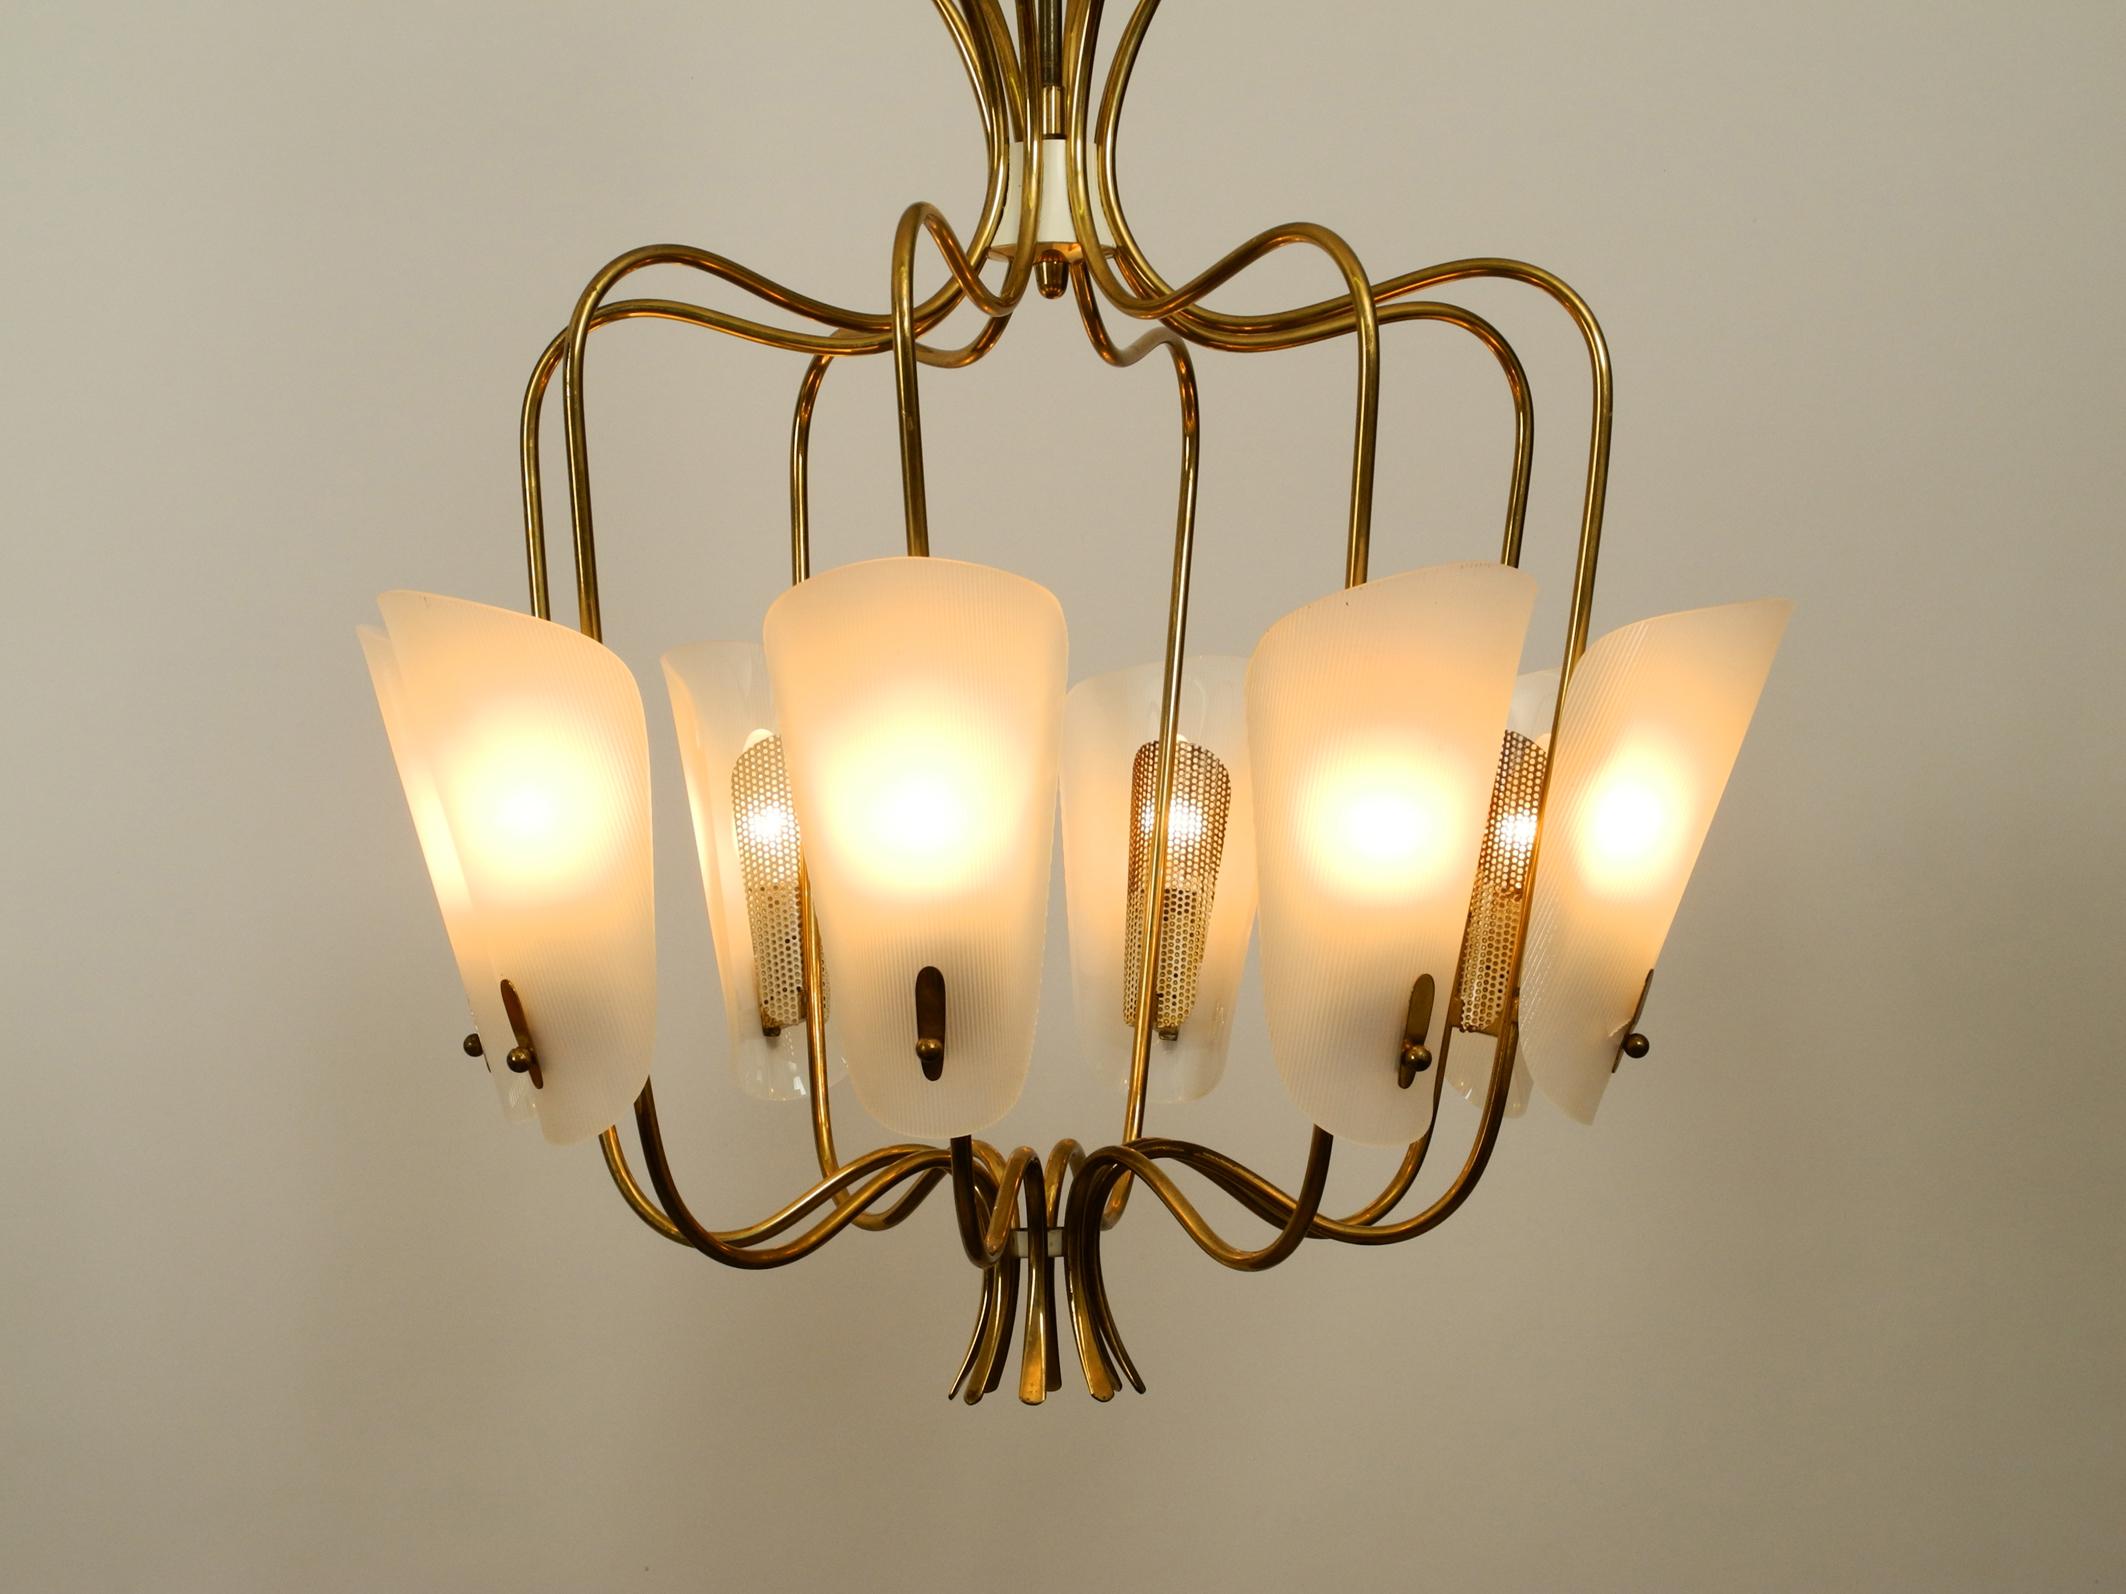 Gorgeous large Mid-Century Modern brass chandelier with
eight curved brass arms and large plexiglass shades.
Exceptional rare design from the 1950s.
Eight original metal E14 sockets for max. 40W each.
In very good collector's